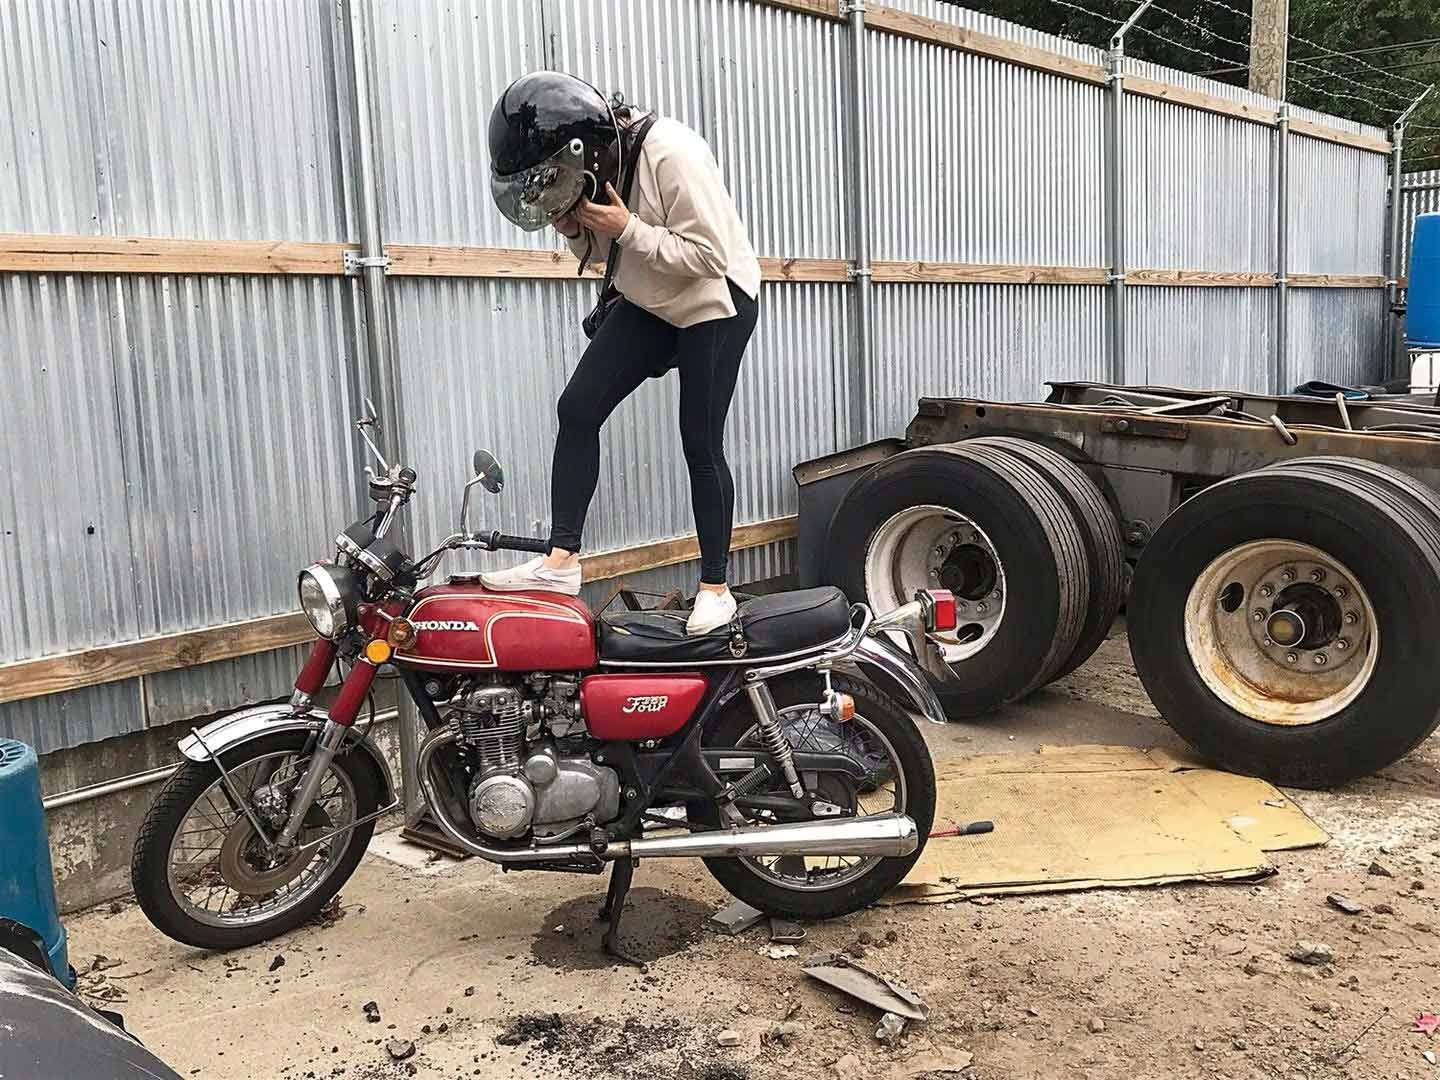 Somebody wanted this bike. Mallory Kramer’s Honda CB350 Four before it was stolen in NYC.